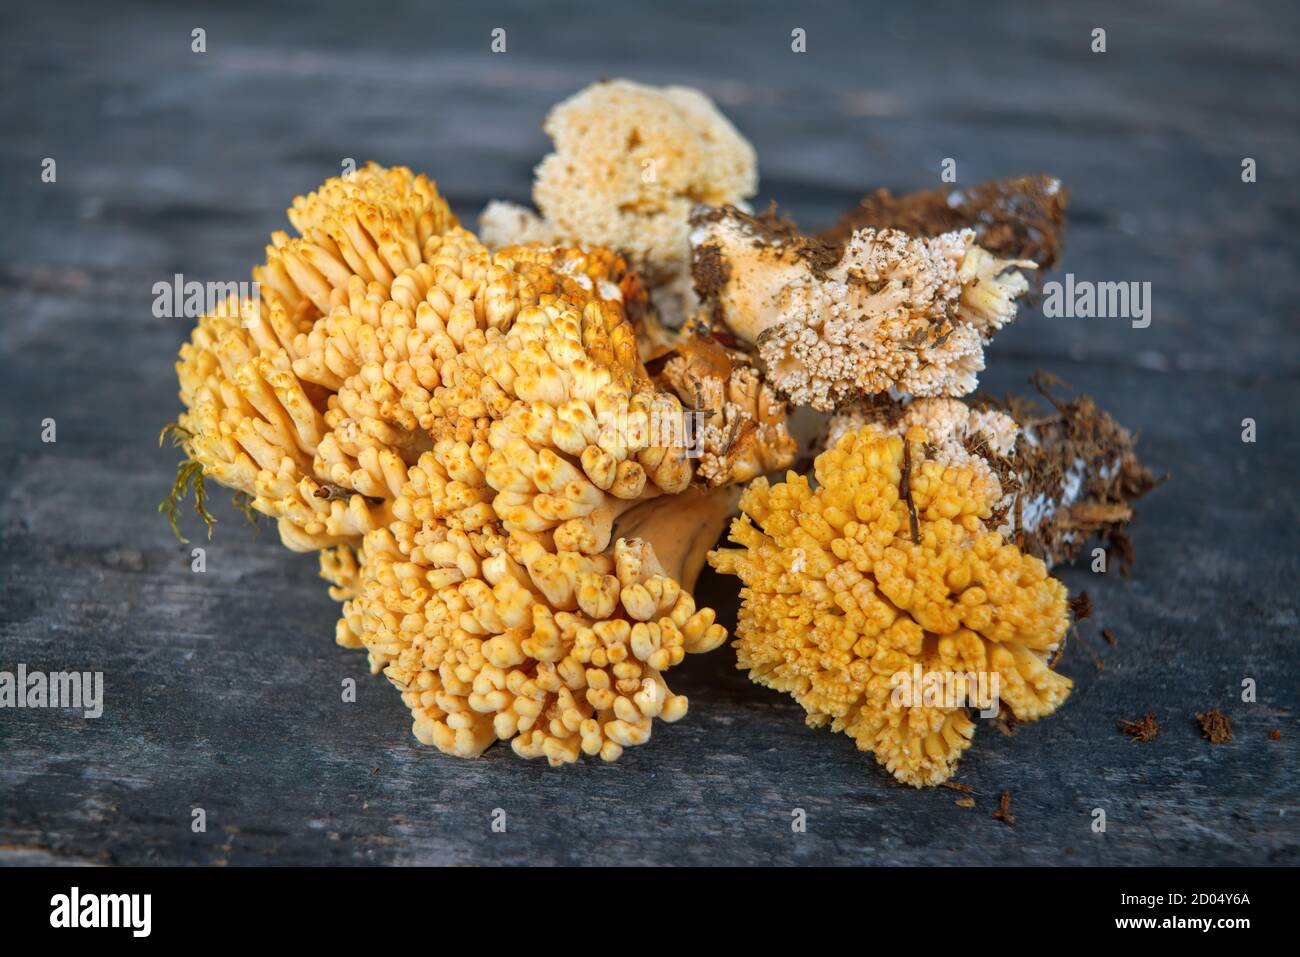 Edible mushroom Ramaria flava on the background of an old wooden table close-up. Stock Photo